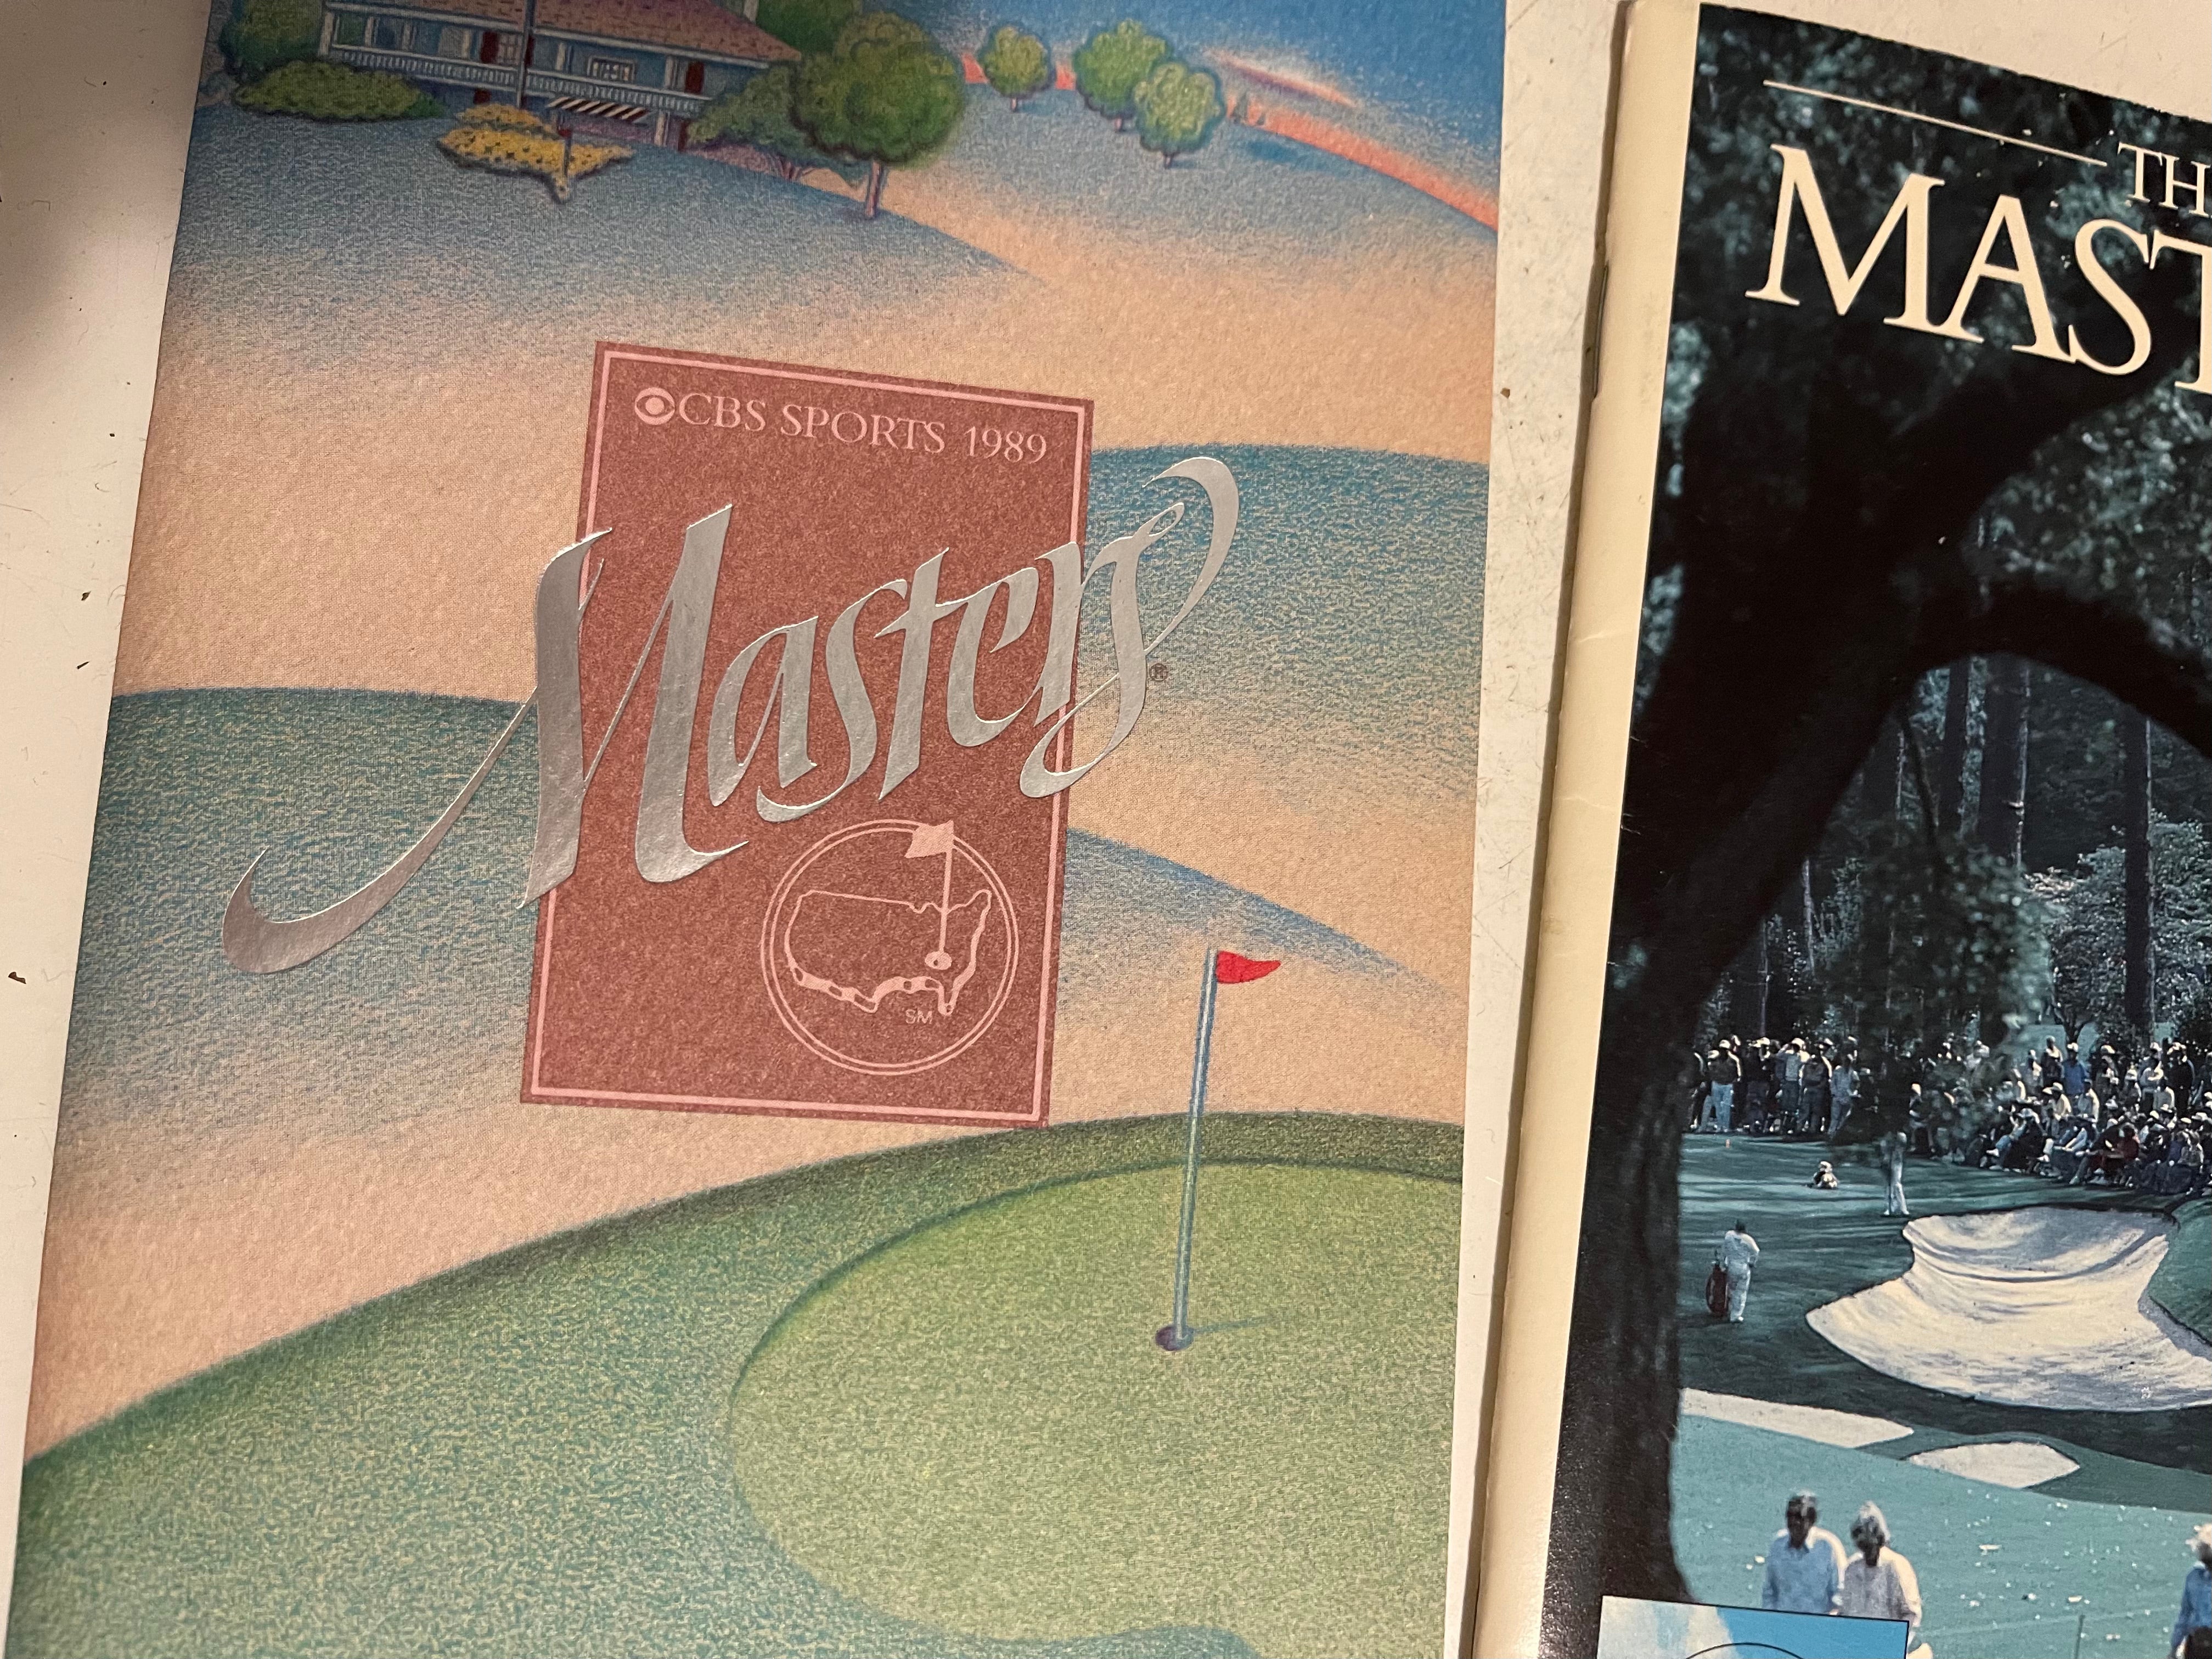 The Masters Golf Tournament CBS sports guides 1989 and 1990